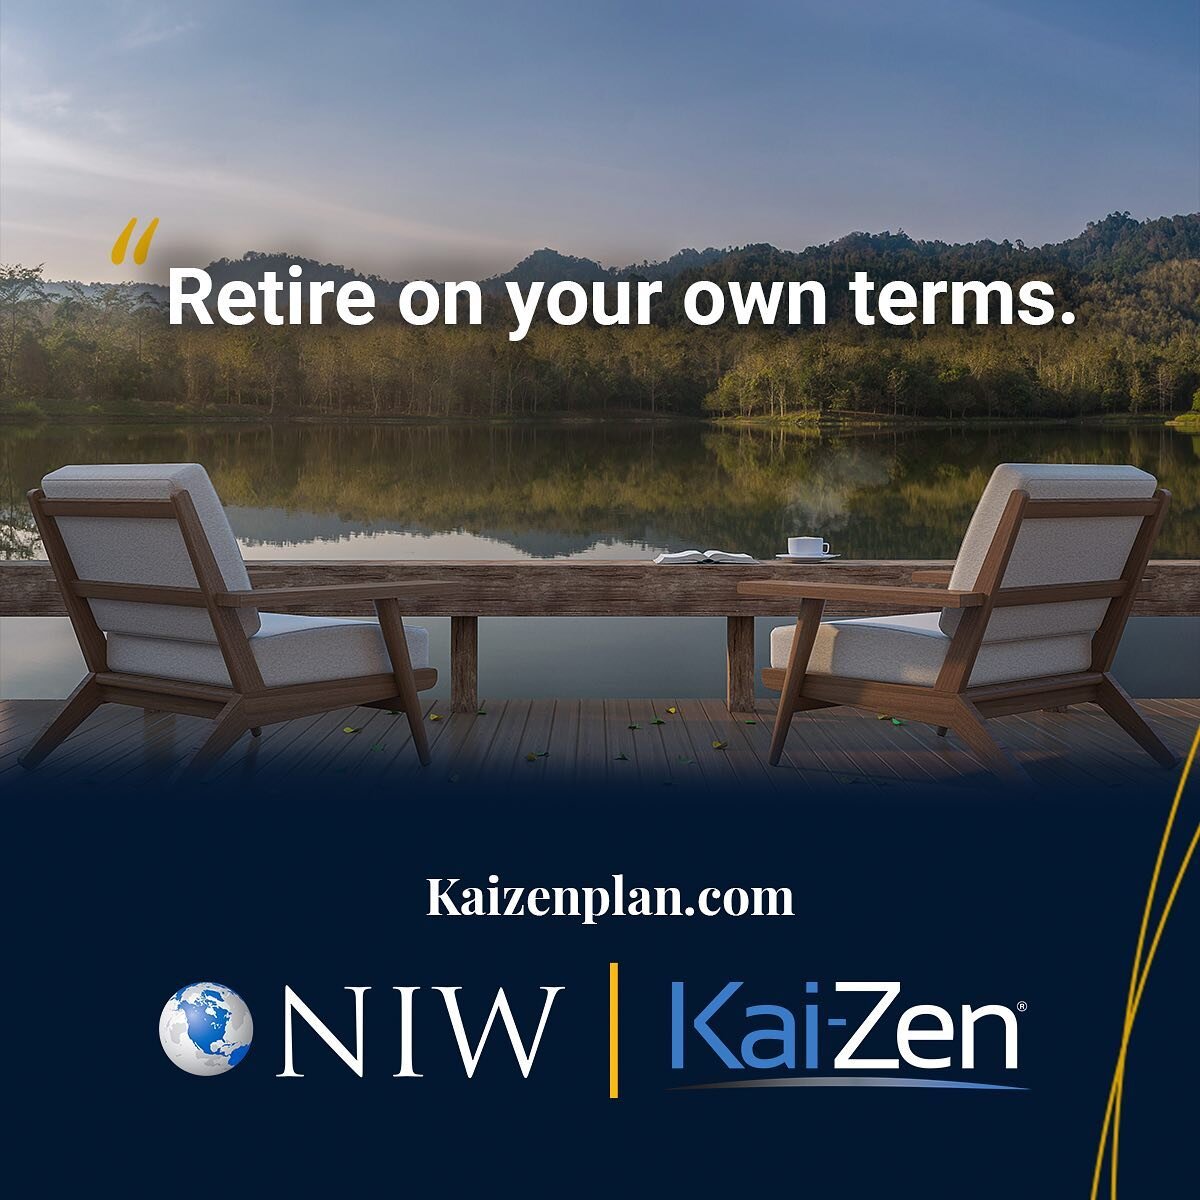 Ready to retire on your own terms? Let's create a plan that gives you the financial security and peace of mind you need to enjoy your golden years. #retirementplanning #financialplanning #retirementsecurity